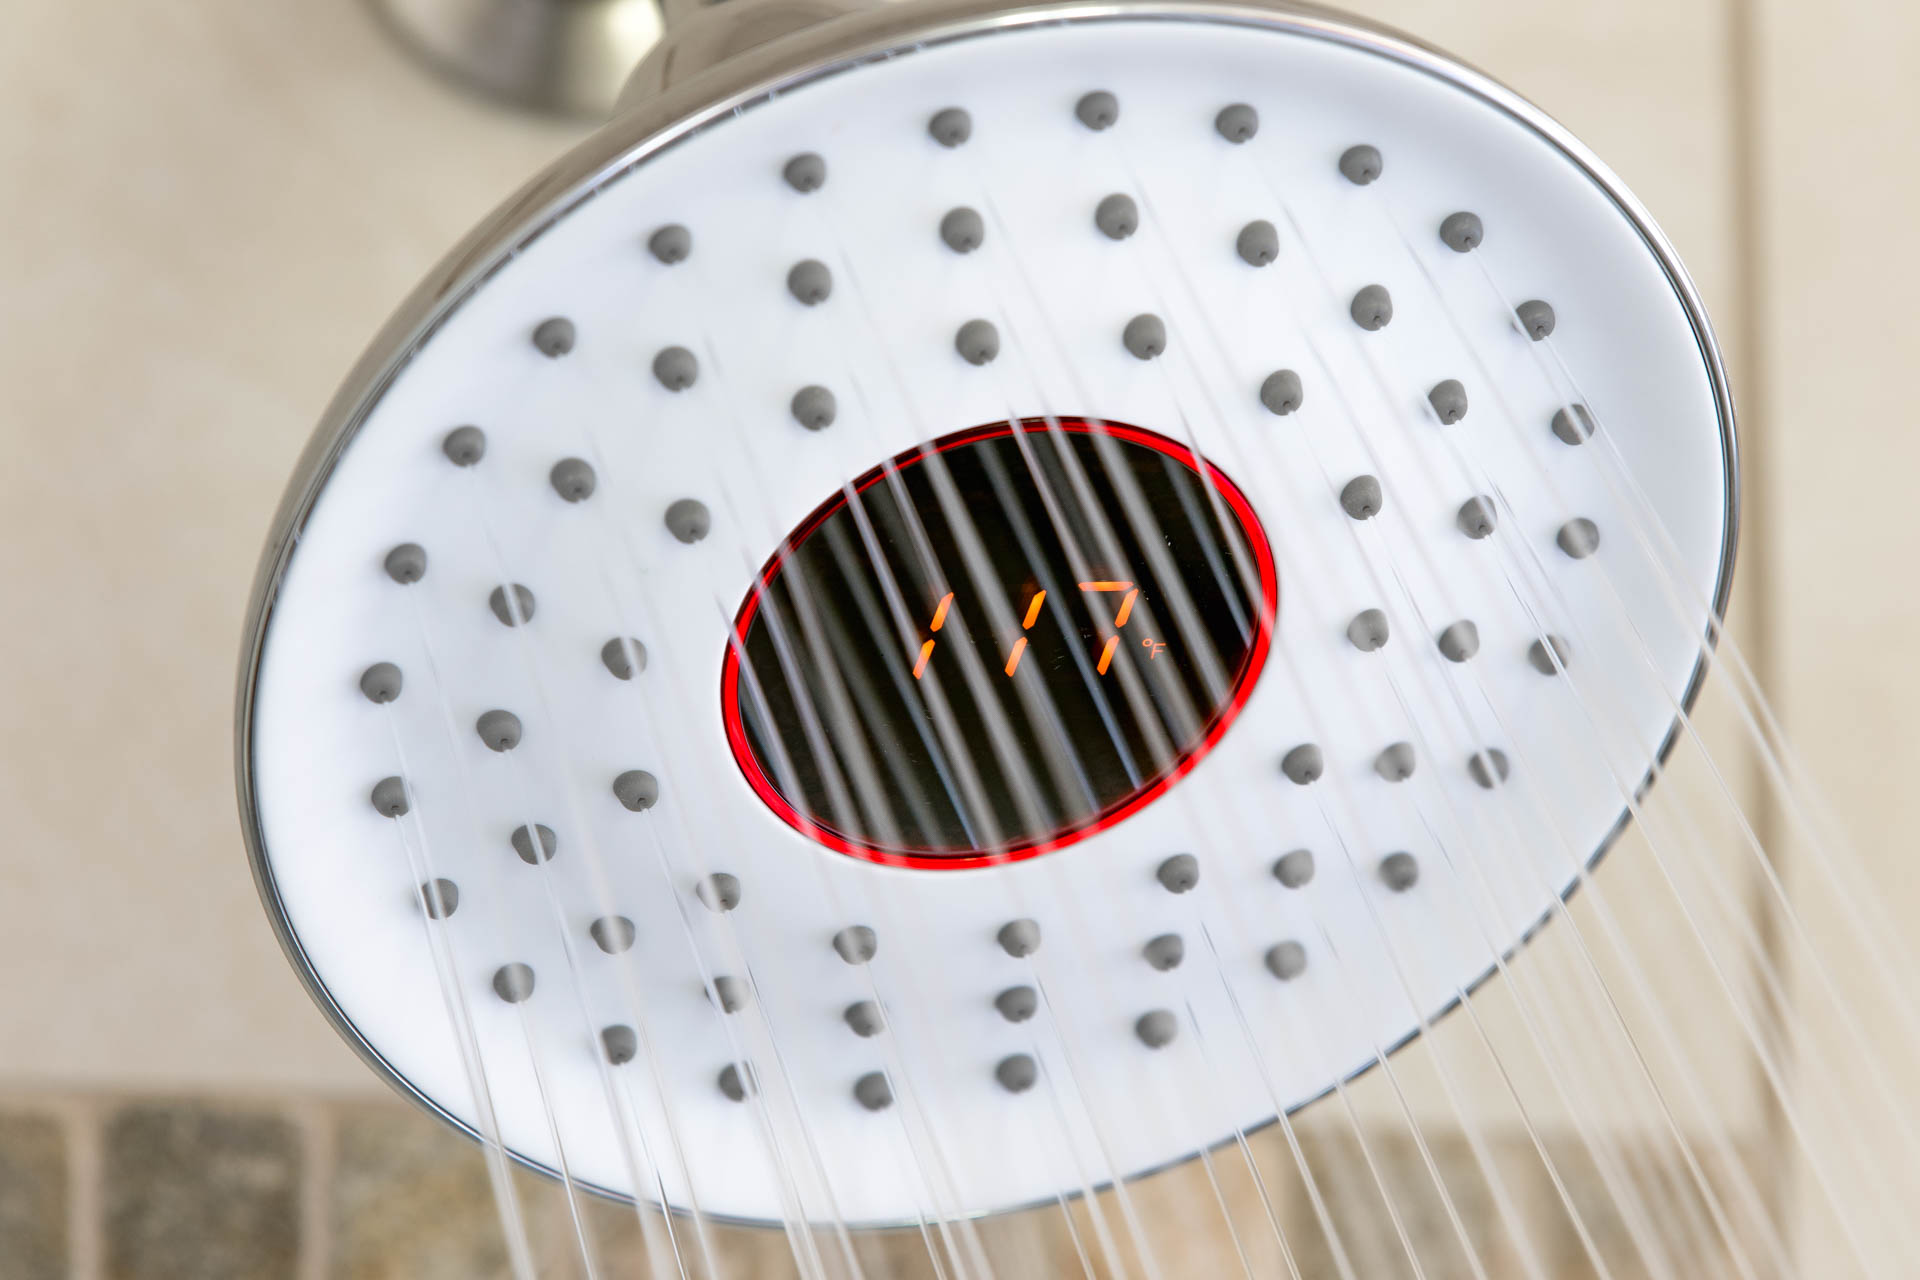 Big Data, Small Water: WaterHawk Smart Showerhead Delivers Digitized House.